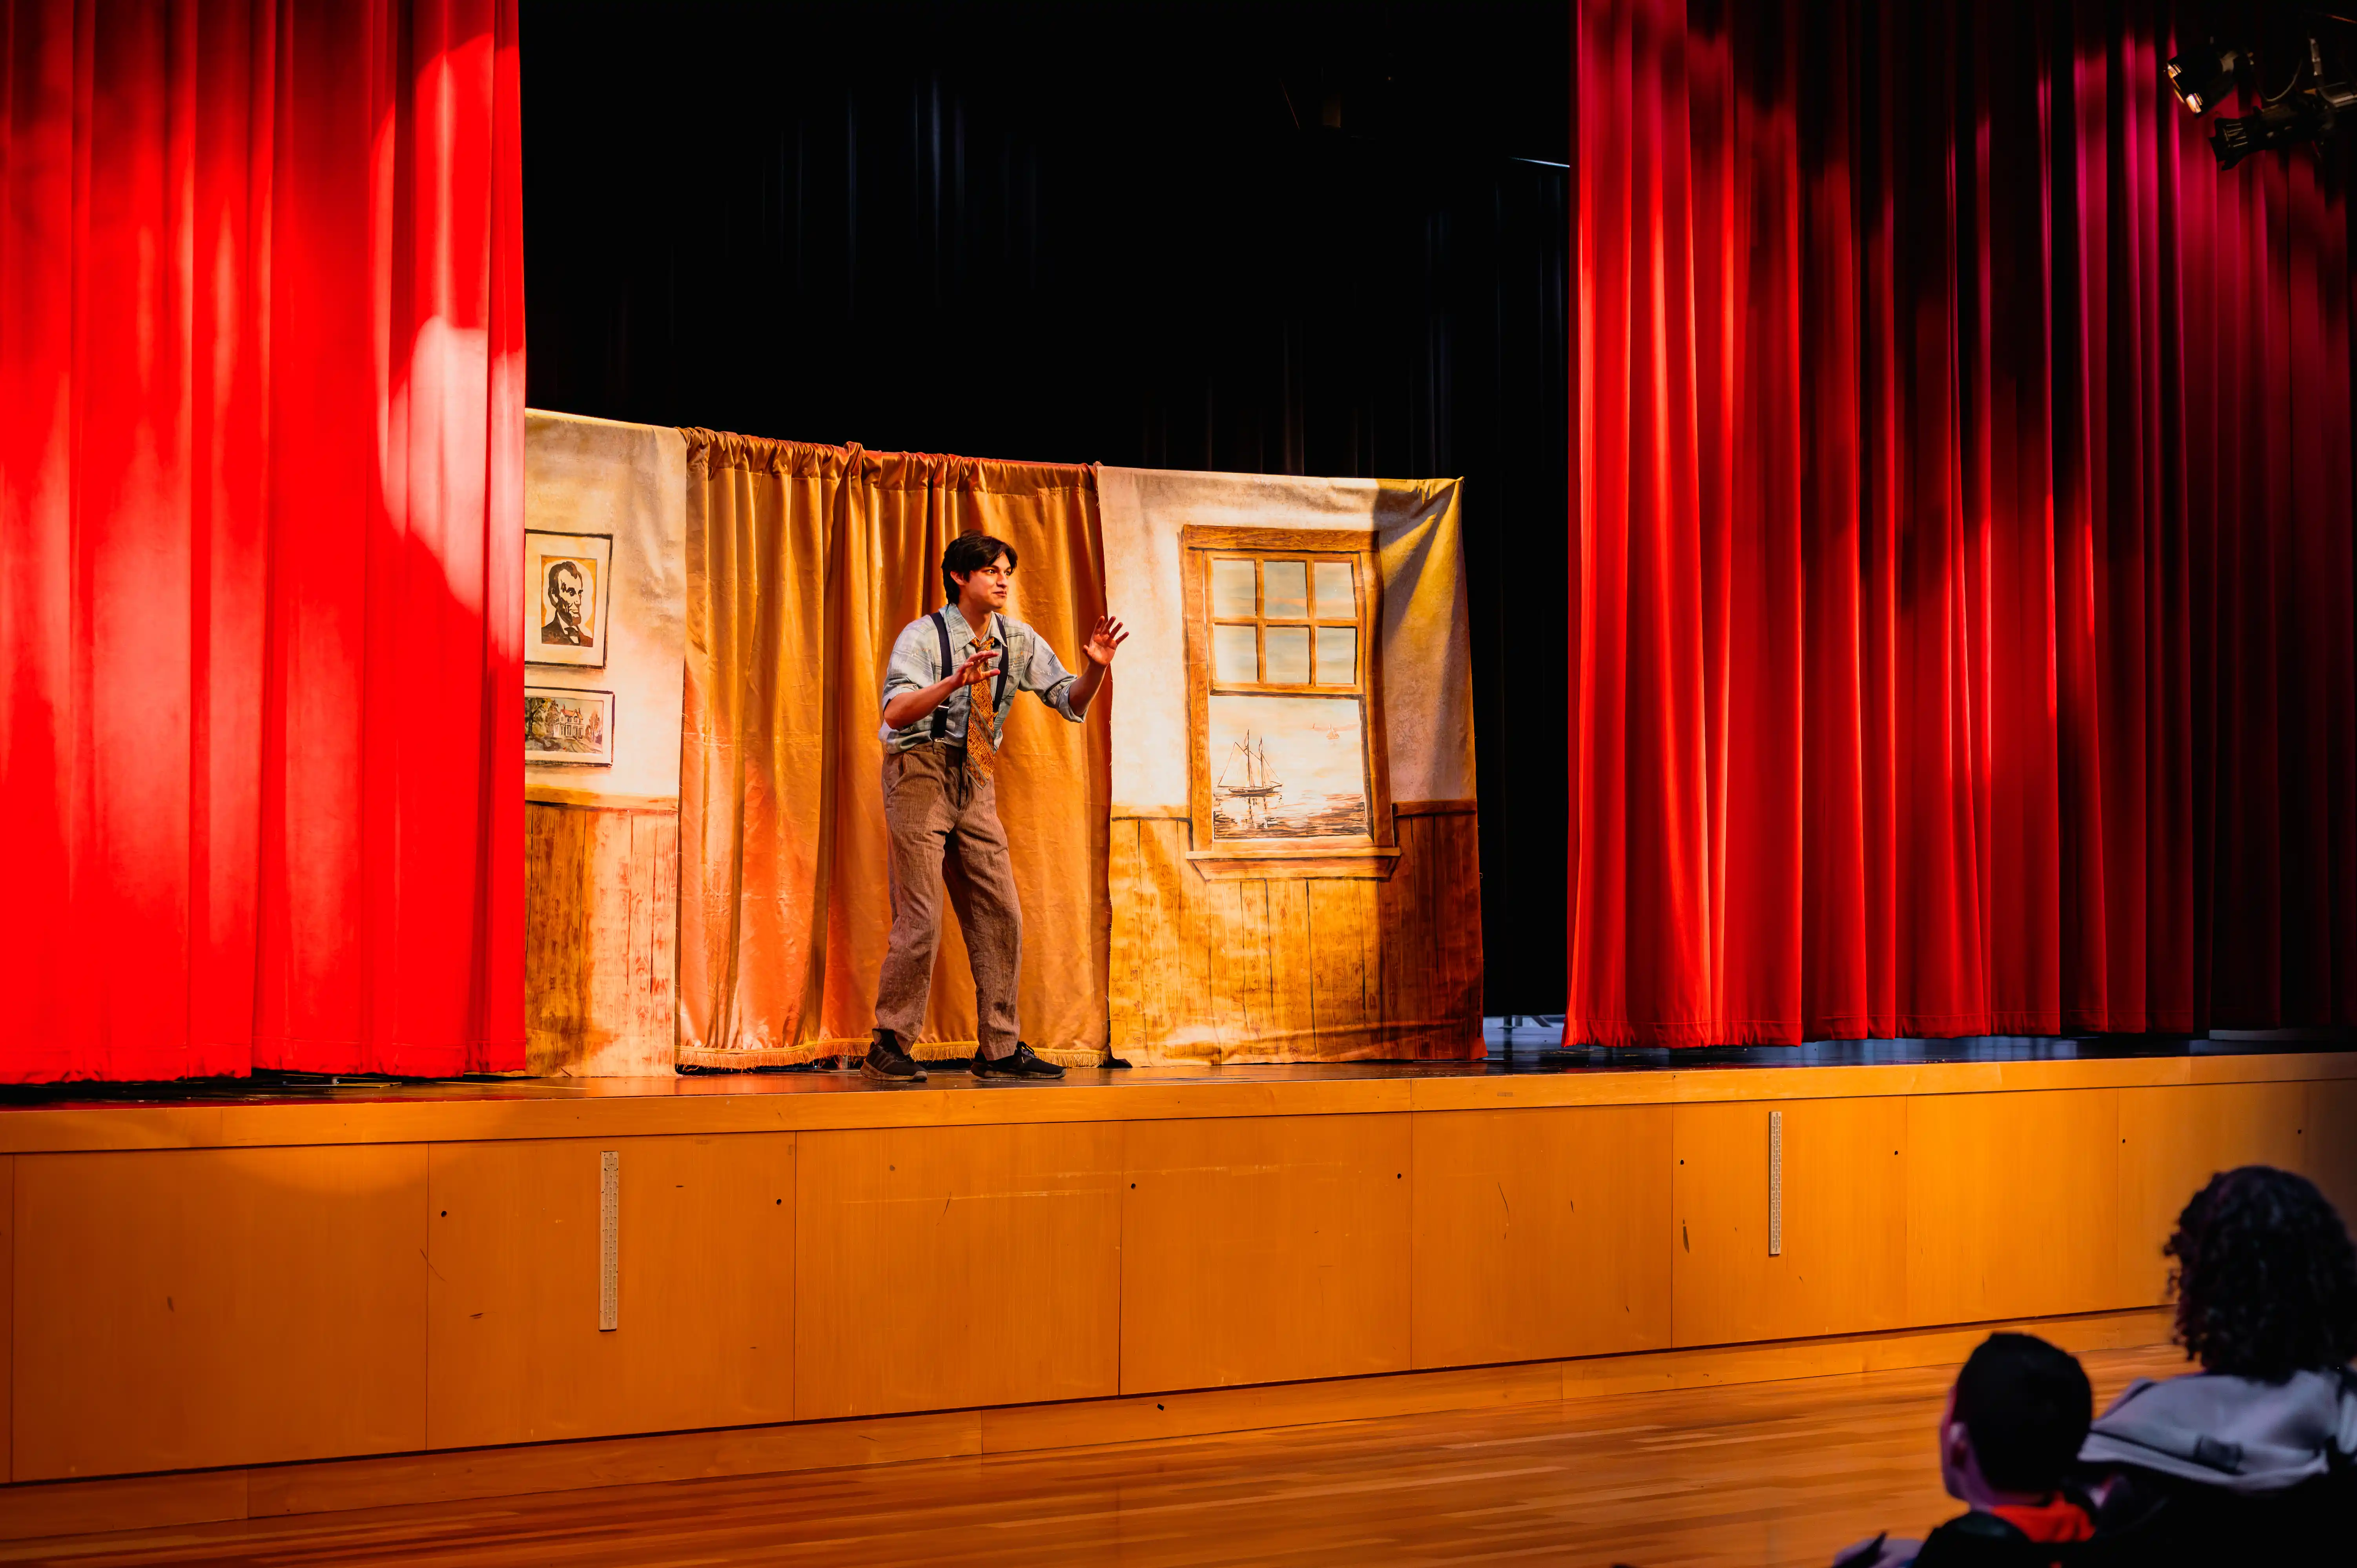 Performer on stage at a theater with red curtains and a simple set, addressing the audience.